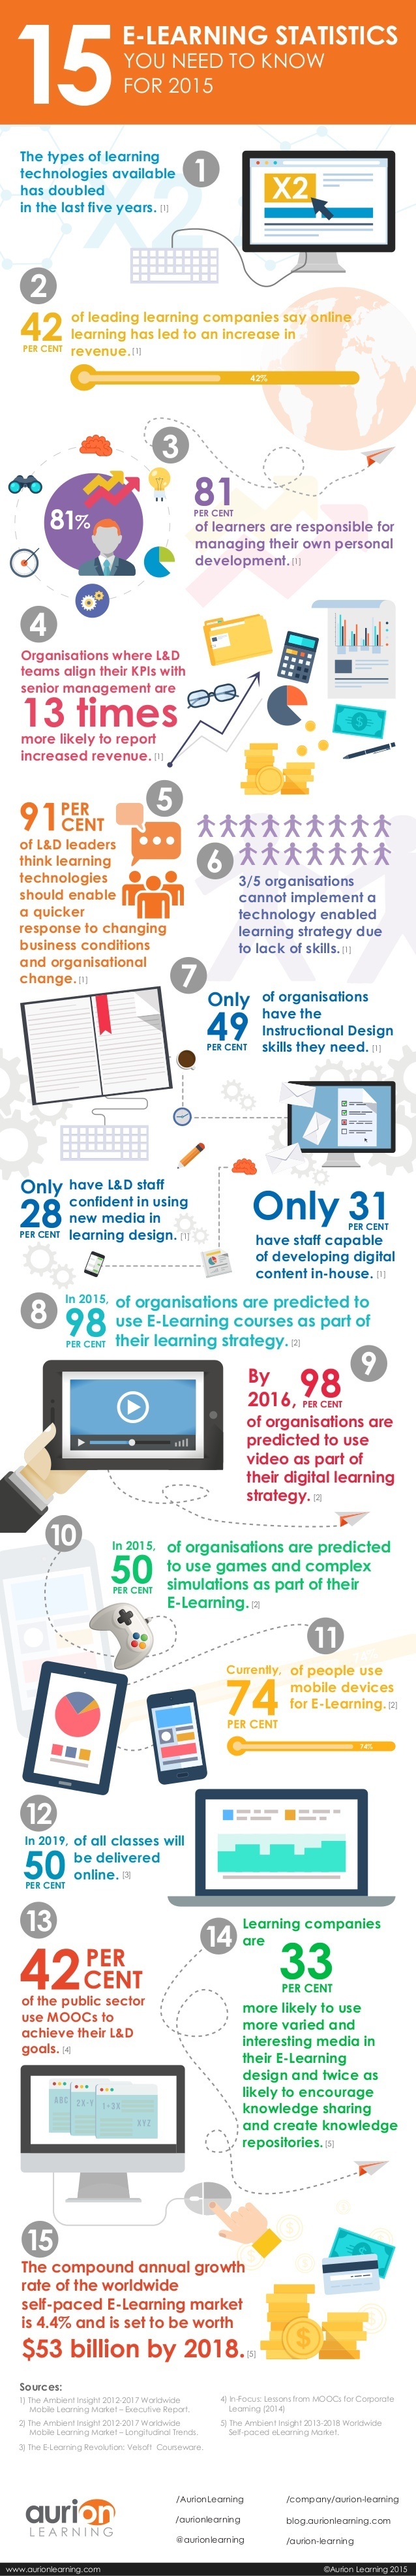 15 eLearning Statistics You Need to Know for 2015 Infographic